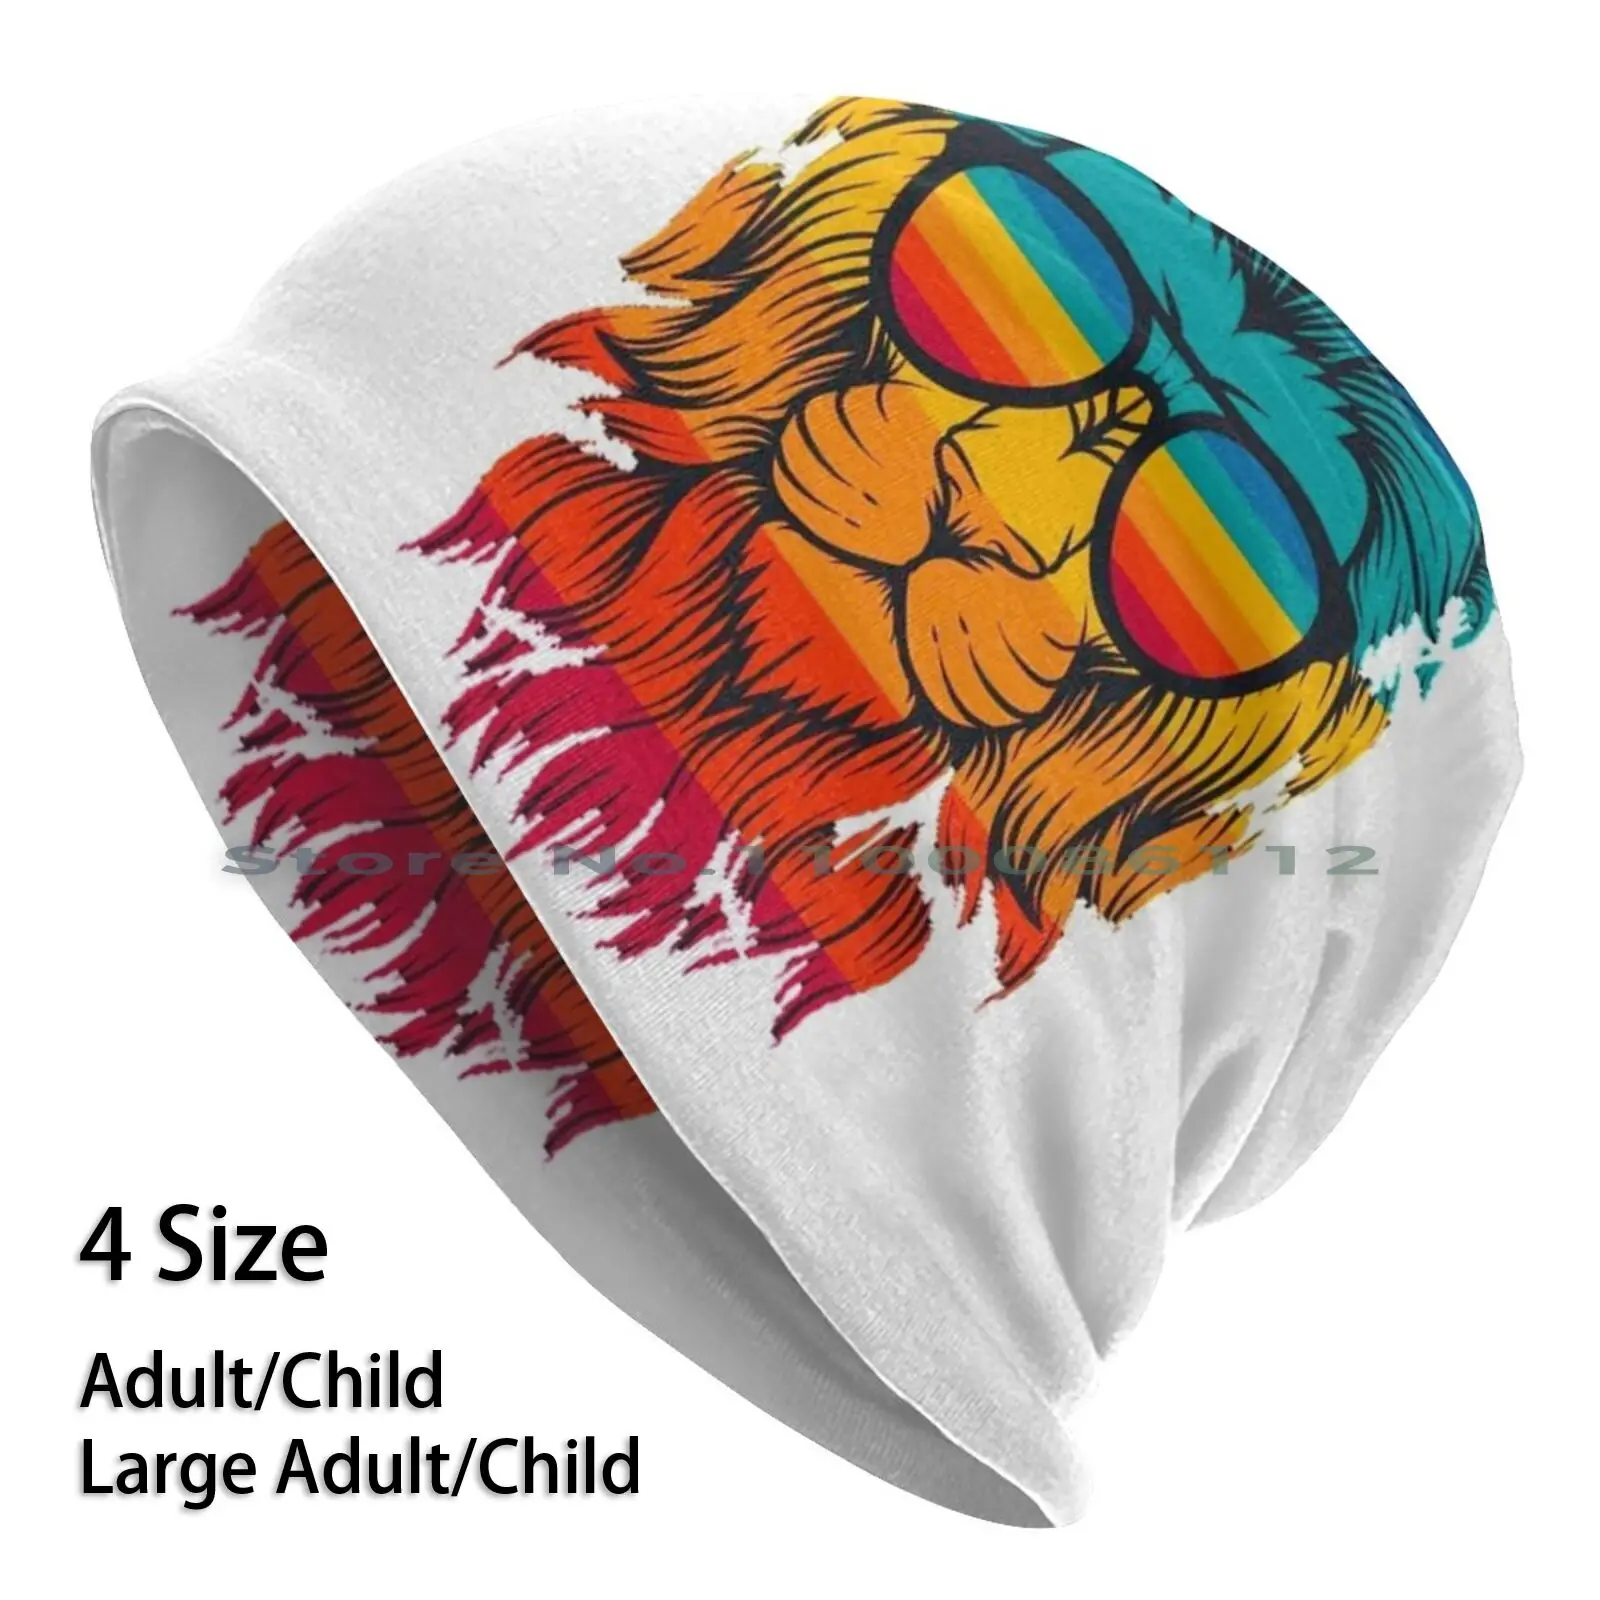 

Dreadnought Beanies Knit Hat Lion Rasta Multicolor Glasses Sunny Fauna King Of The Jungle Brimless Knitted Hat Skullcap Gift